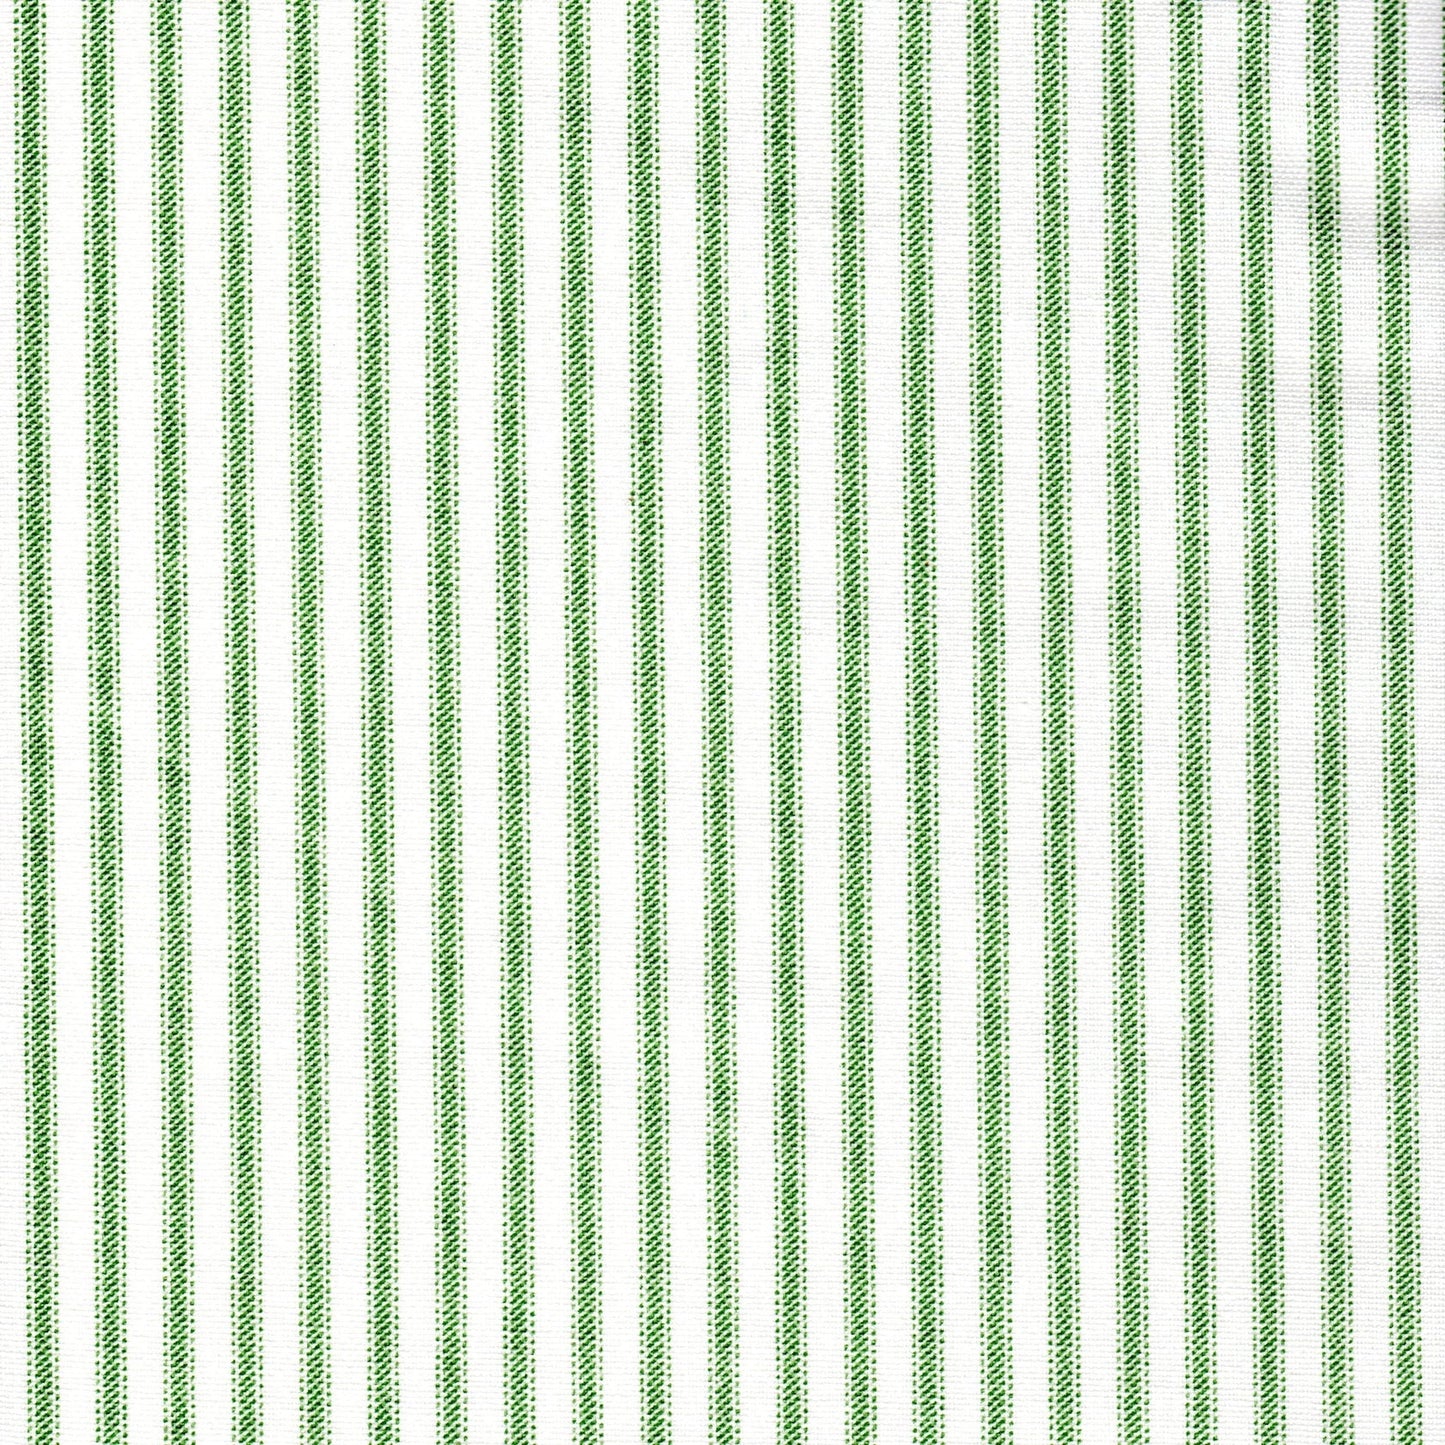 scallop valance in Classic Pine Green Ticking Stripe on White